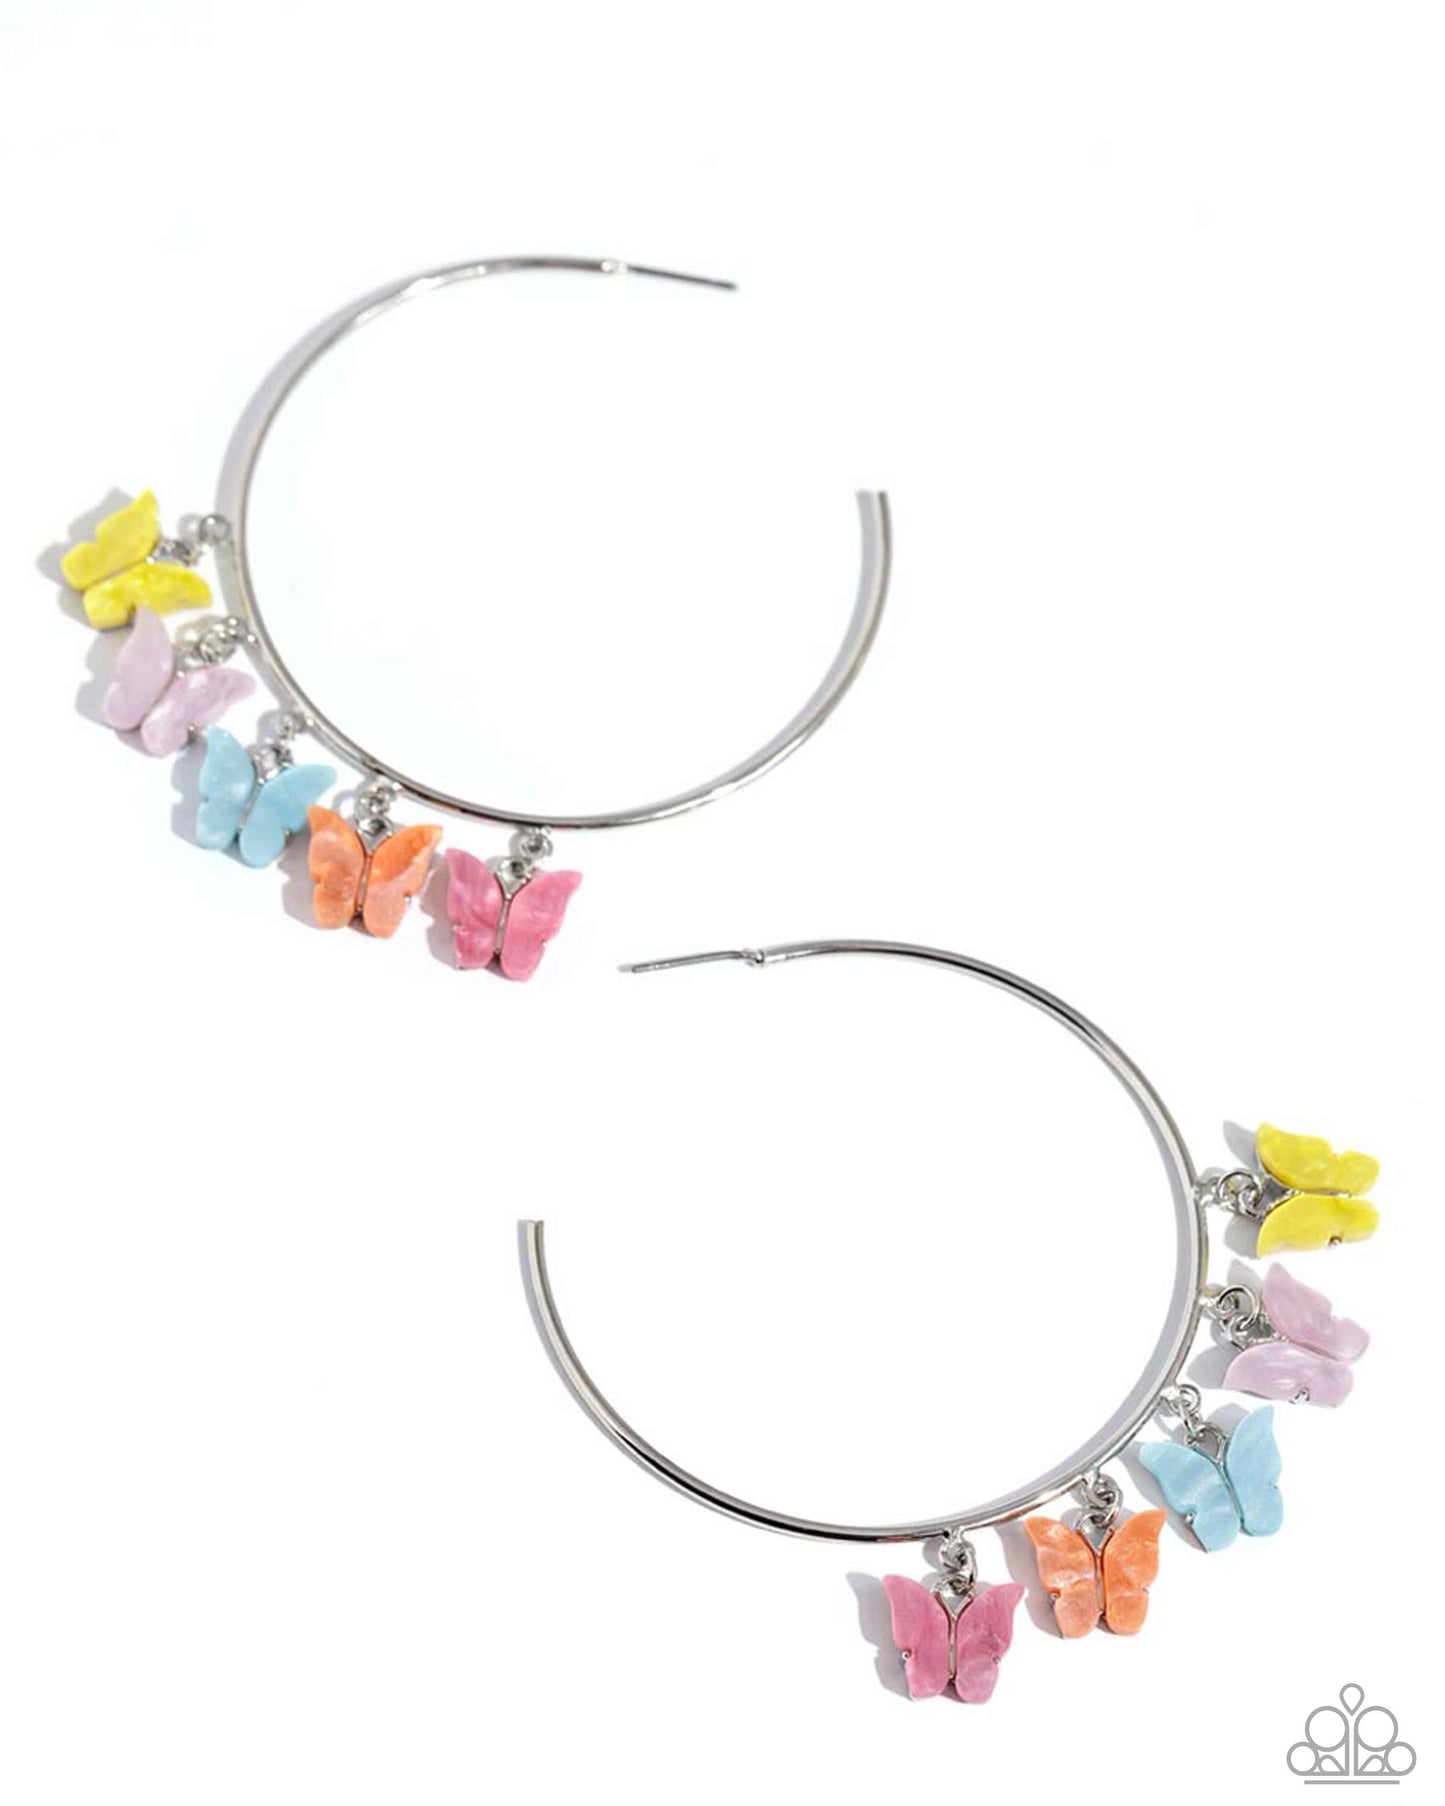 <p data-mce-fragment="1">Attached along an oversized silver hoop, a collection of different colored butterflies flutter and fly along the ear for a whimsical finish. Earring attaches to a standard post fitting. Hoop measures approximately 2 1/4" in diameter. Pattern of colors may vary.</p> <p data-mce-fragment="1"><i data-mce-fragment="1">Sold as one pair of hoop earrings.</i></p>